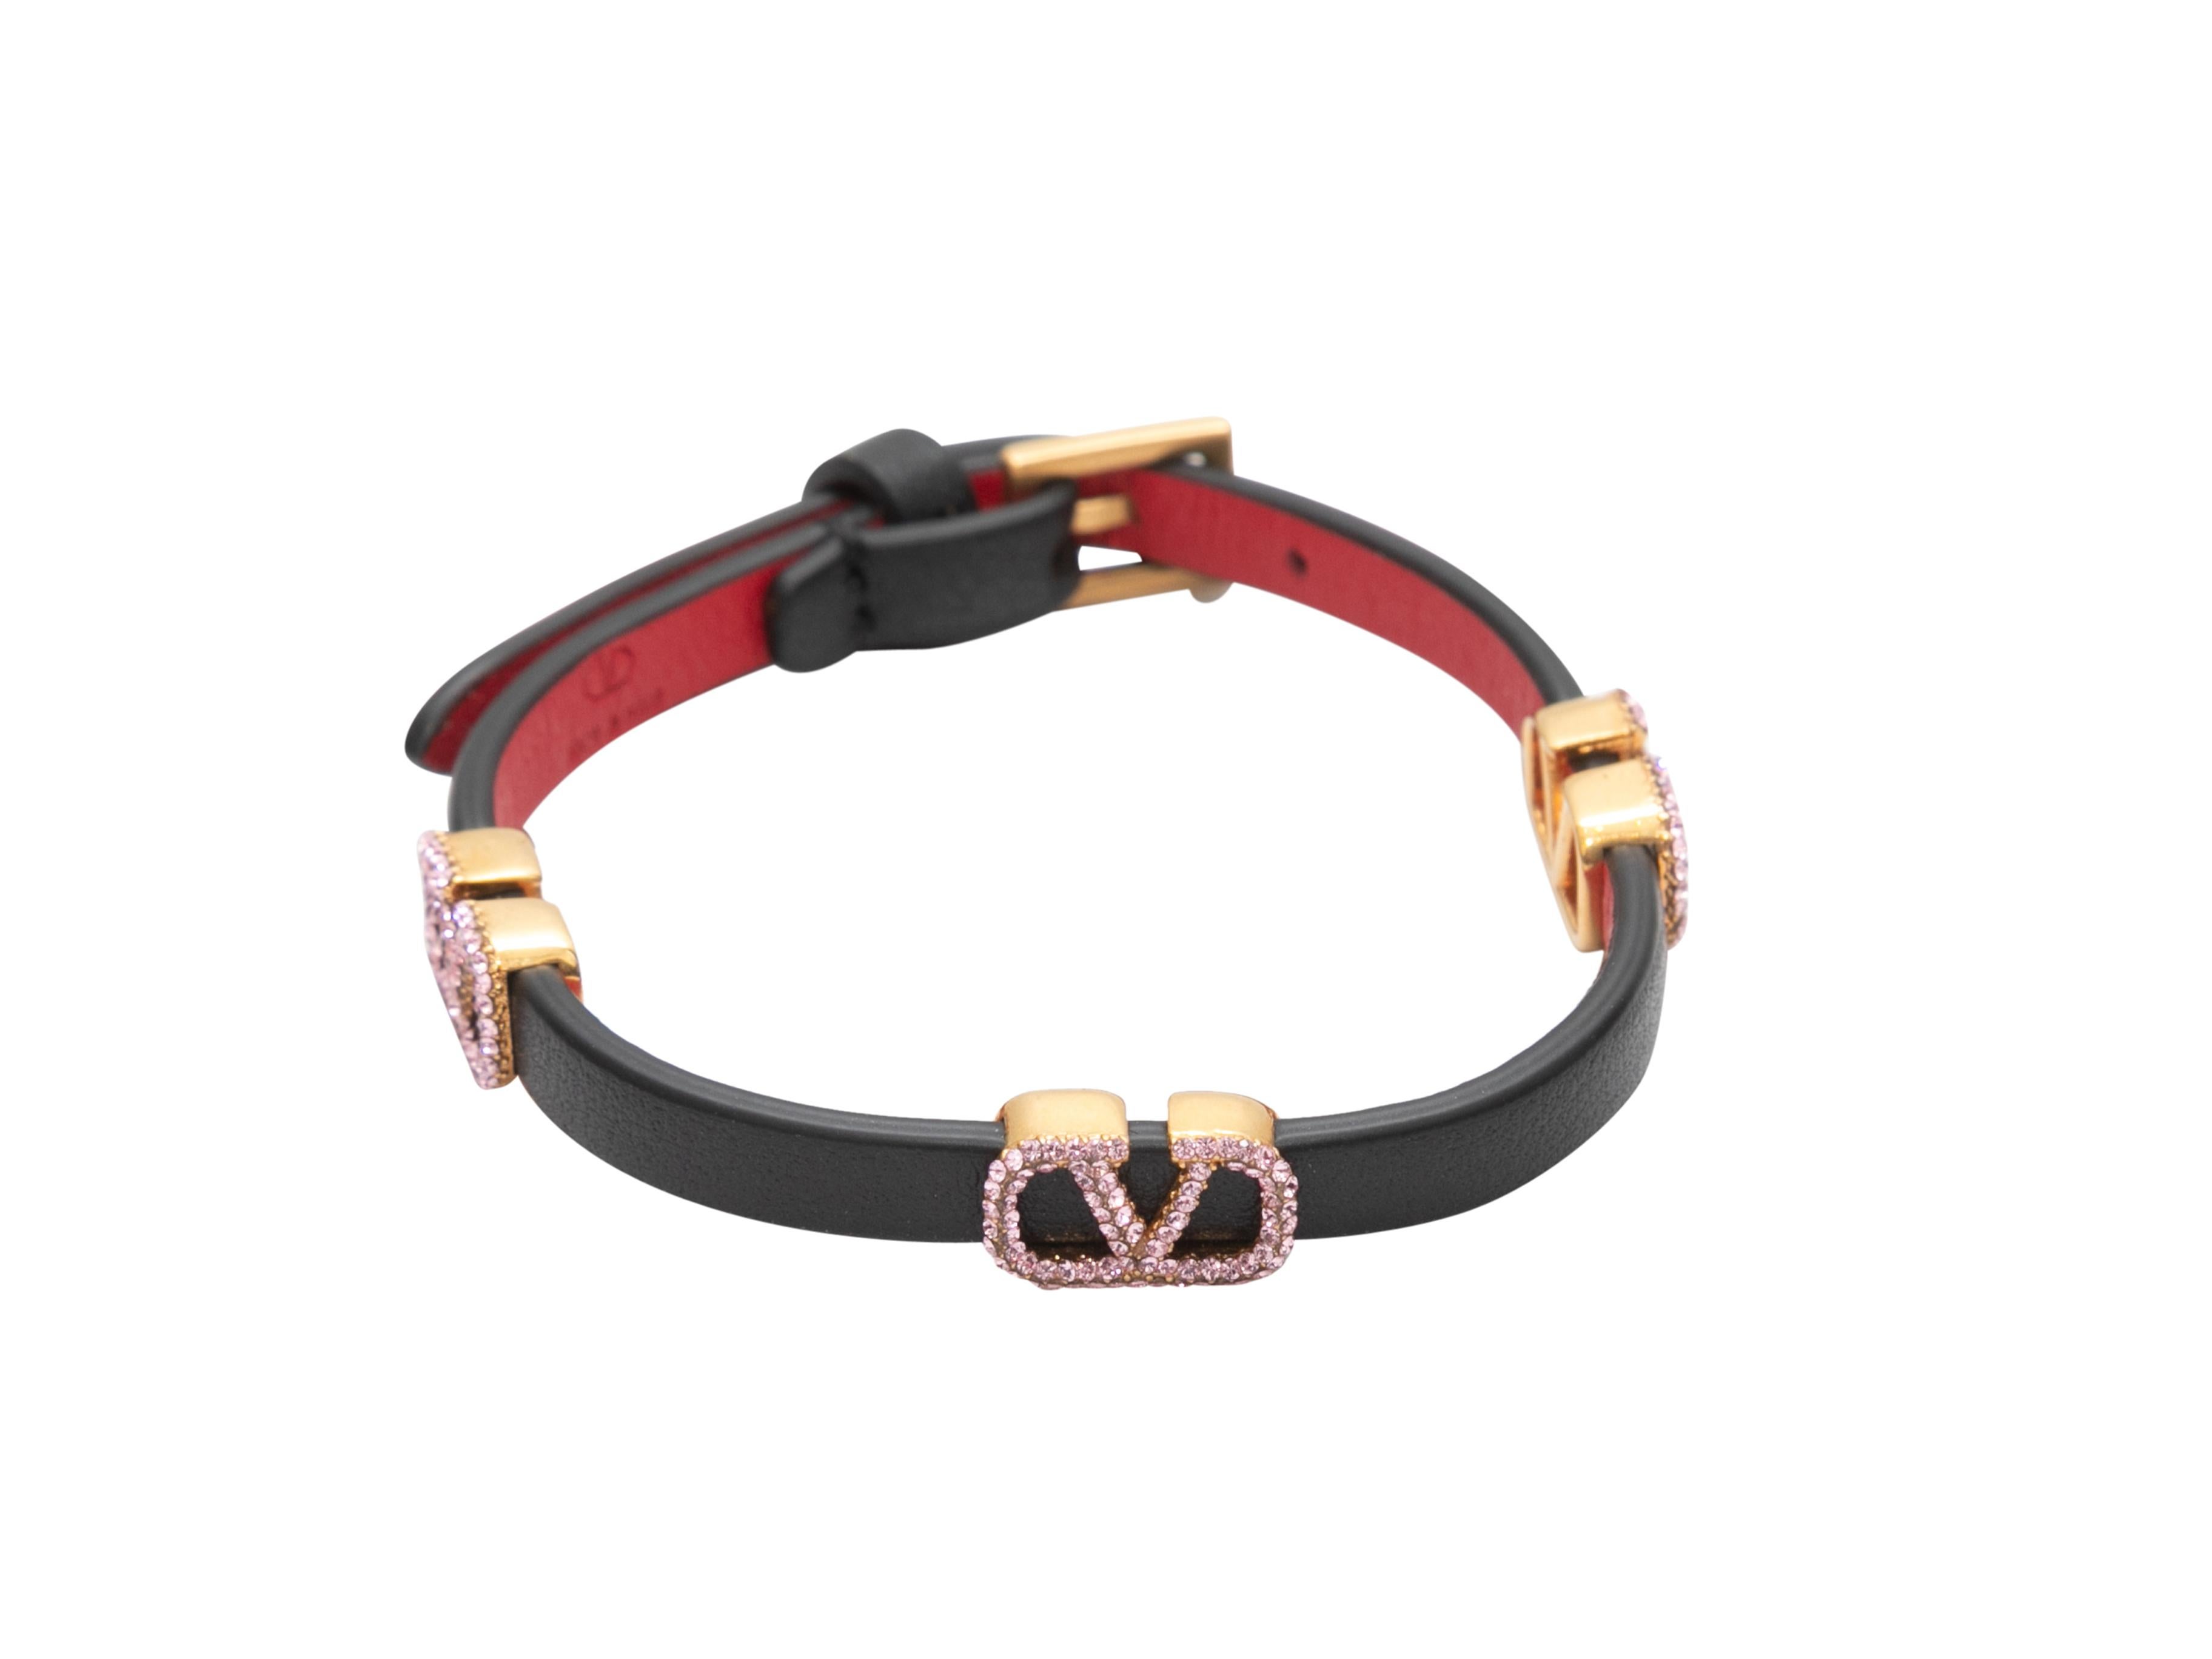 Black leather bracelet by Valentino. Gold-tone logo hardware featuring pink crystal embellishments. Buckle closure. 0.25